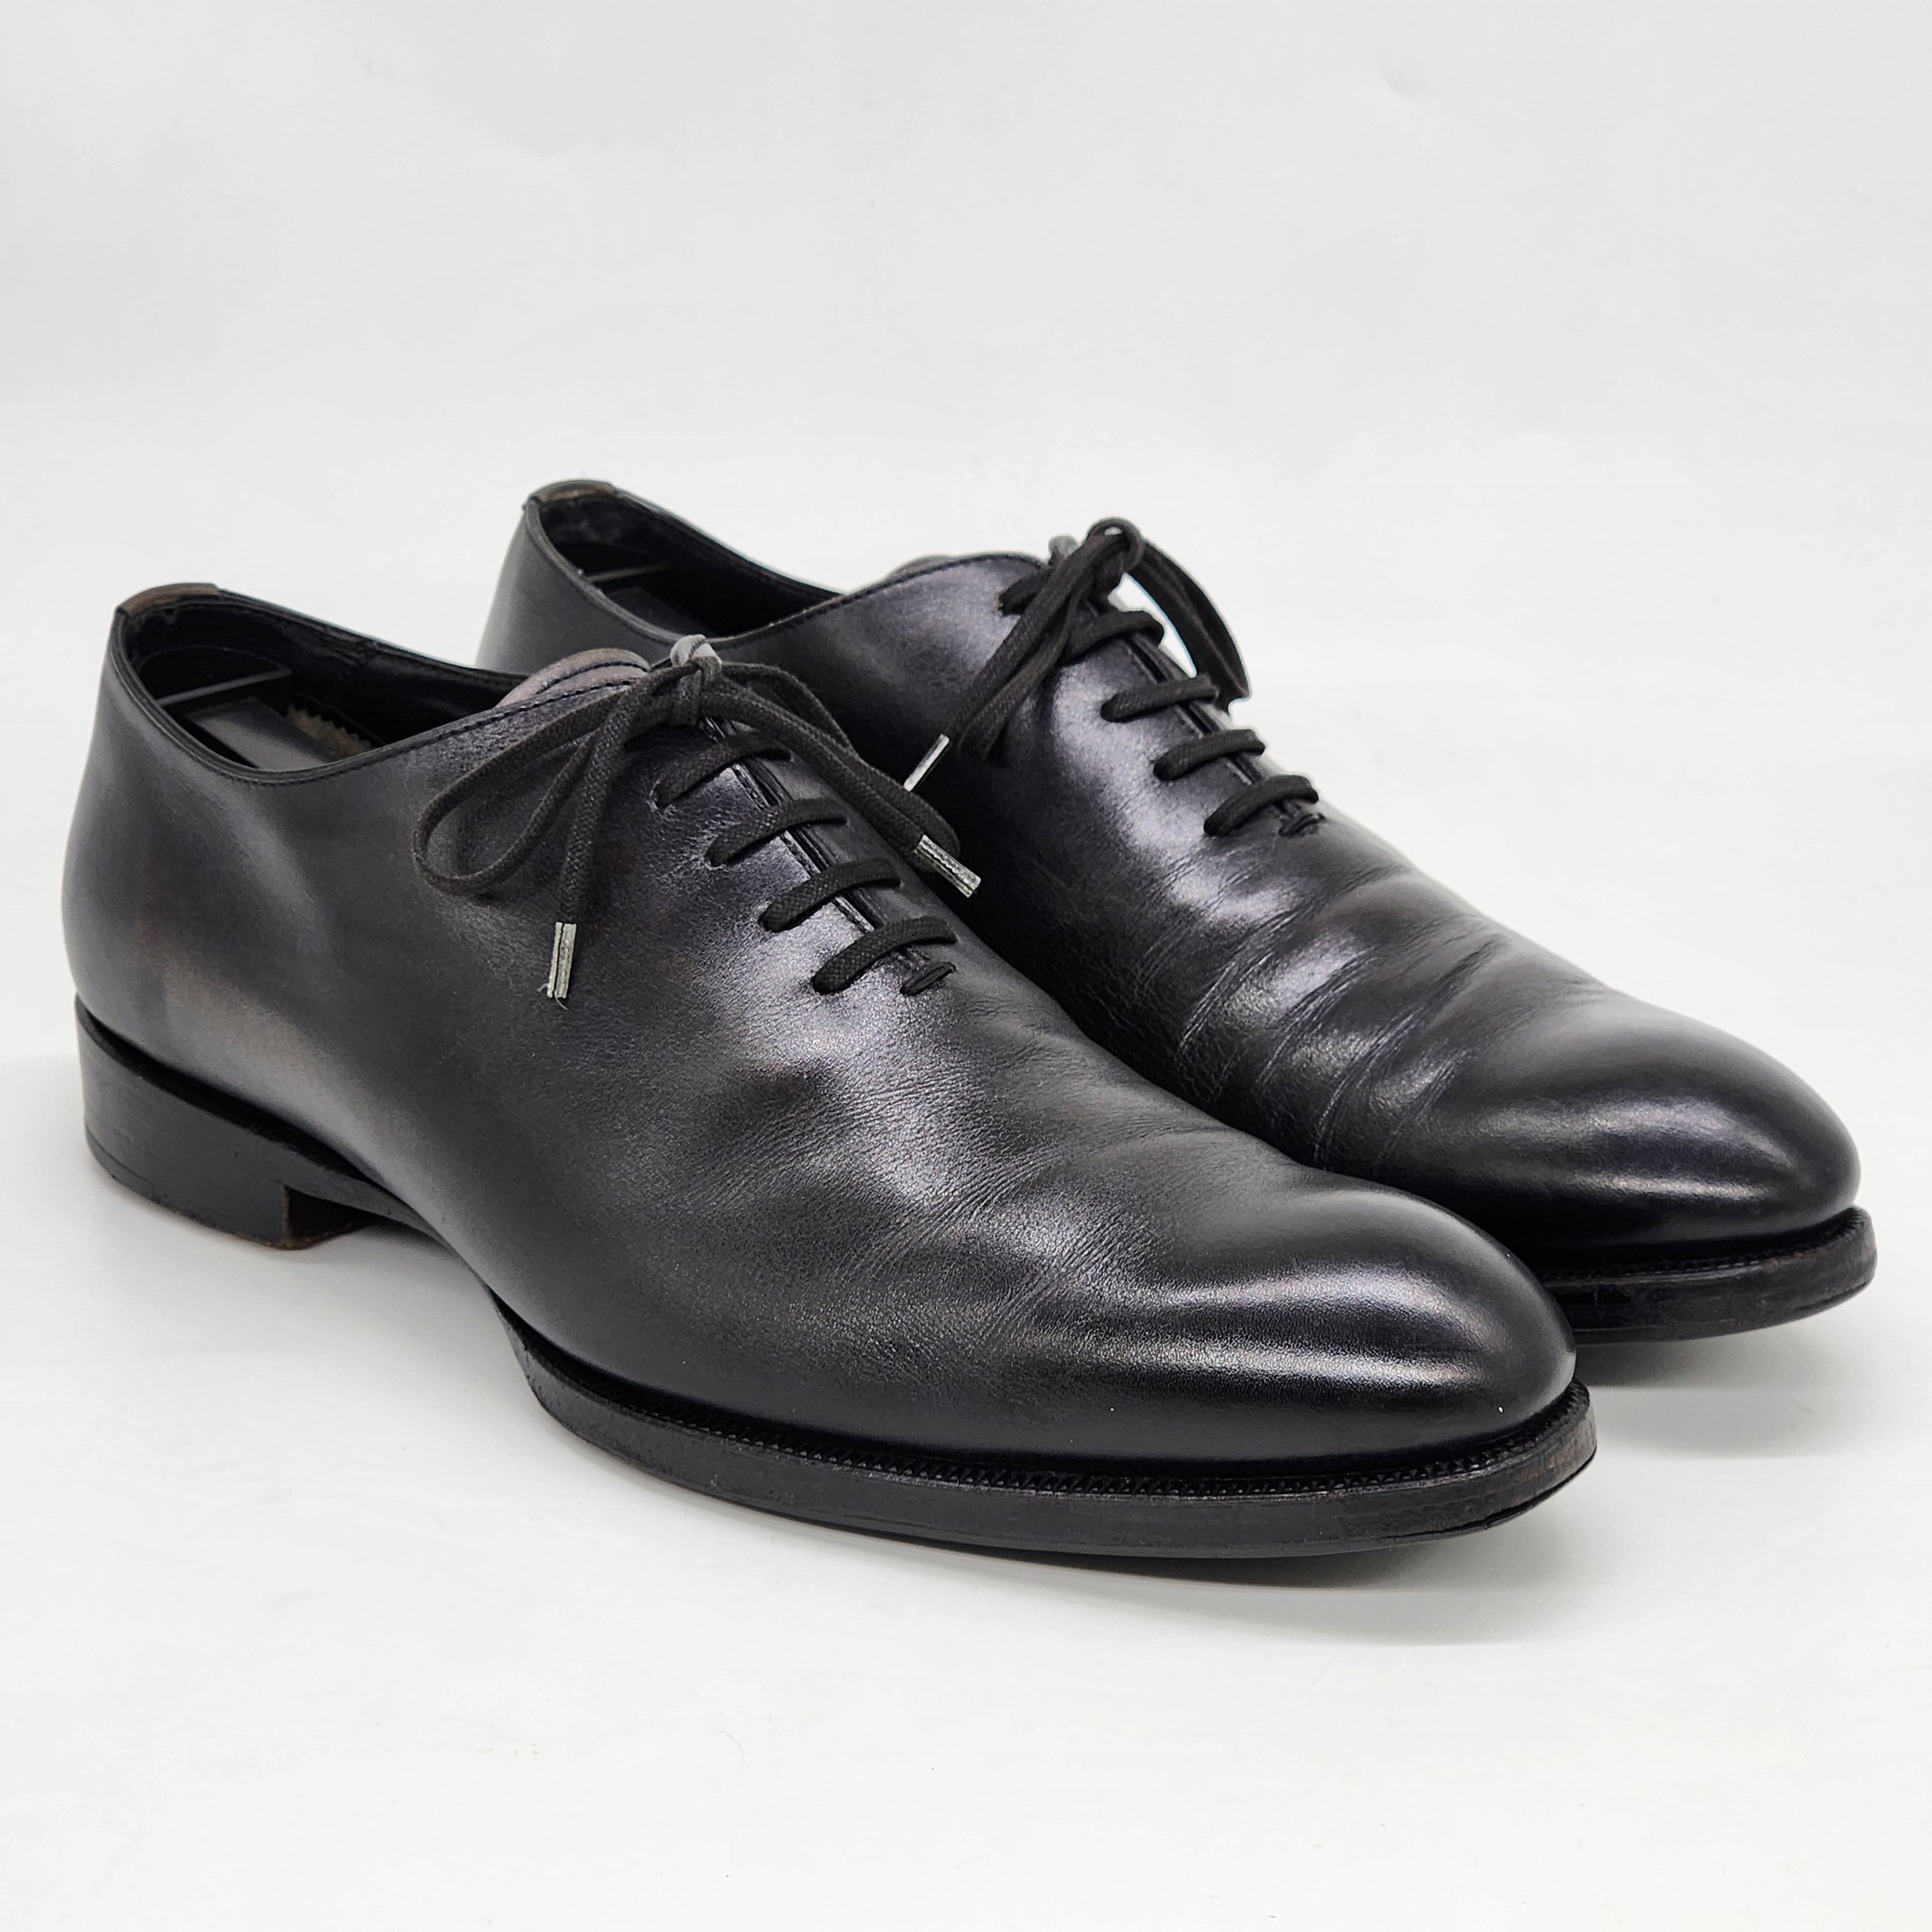 Tom Ford - Elkan Black Leather Whole-cut Oxford Shoes - 1